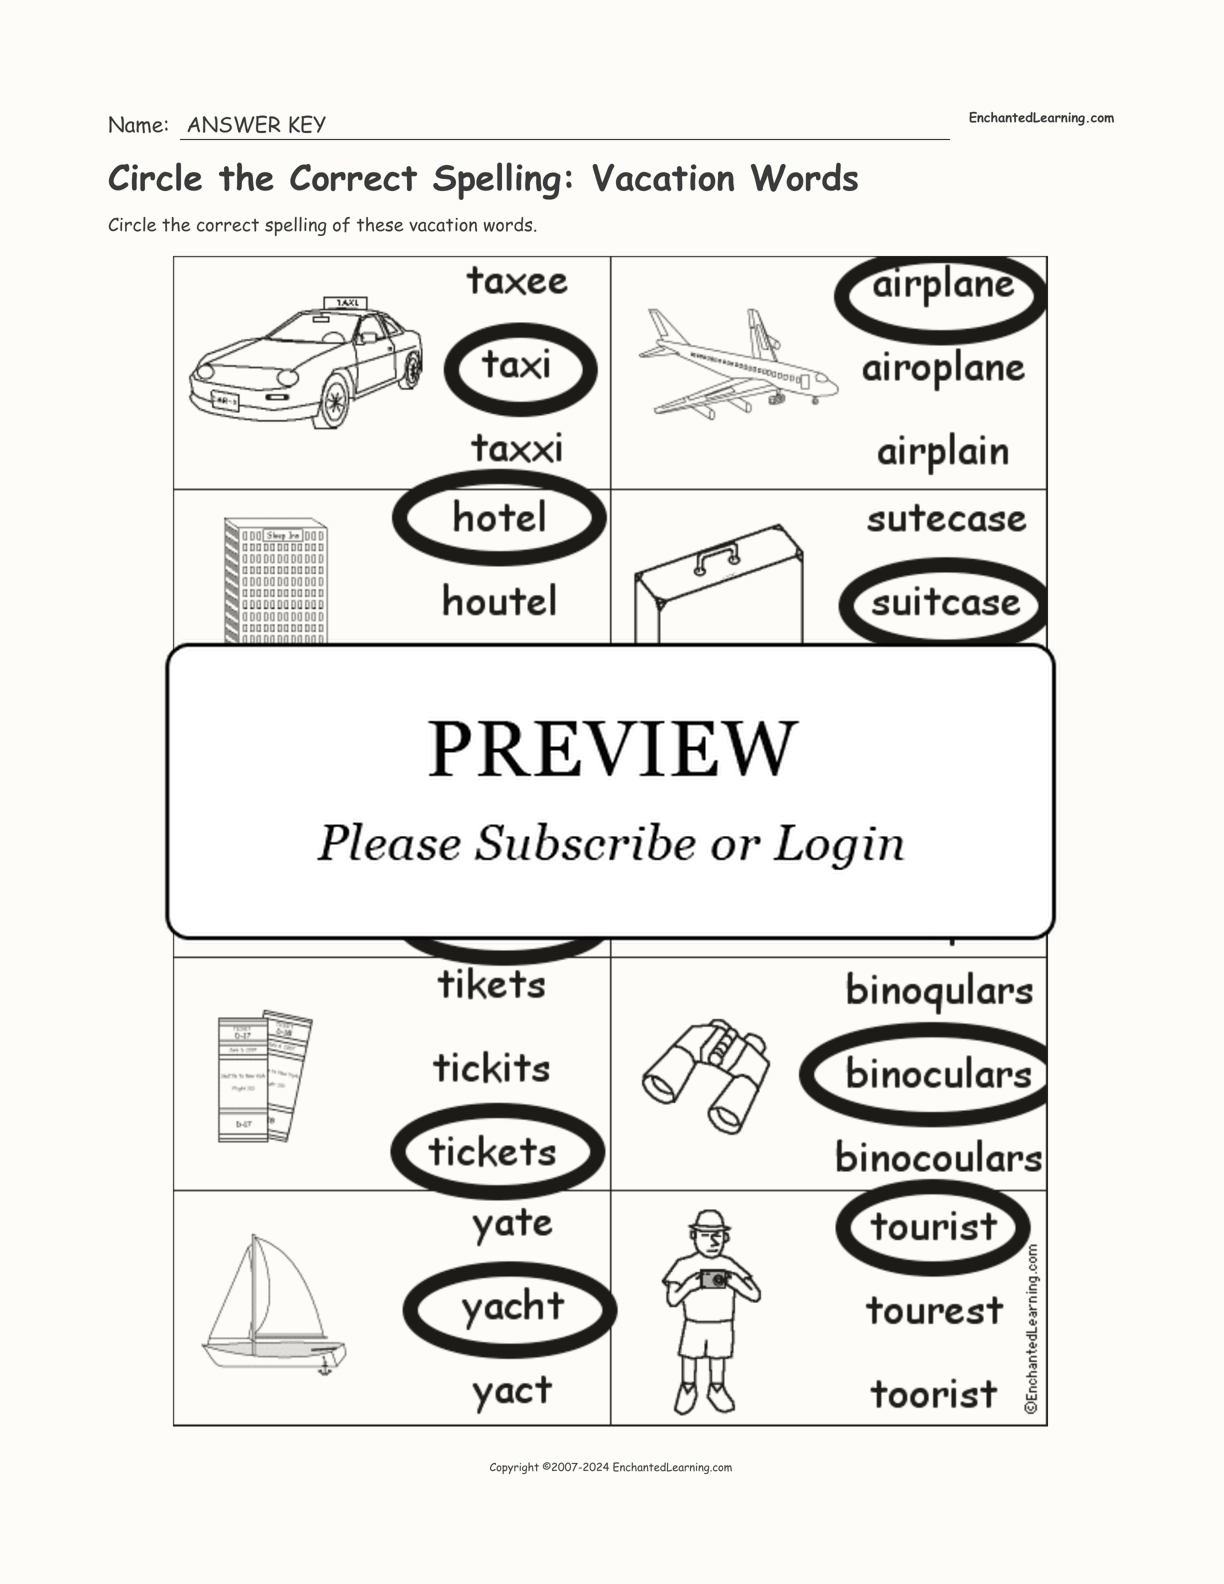 Circle the Correct Spelling: Vacation Words interactive worksheet page 2